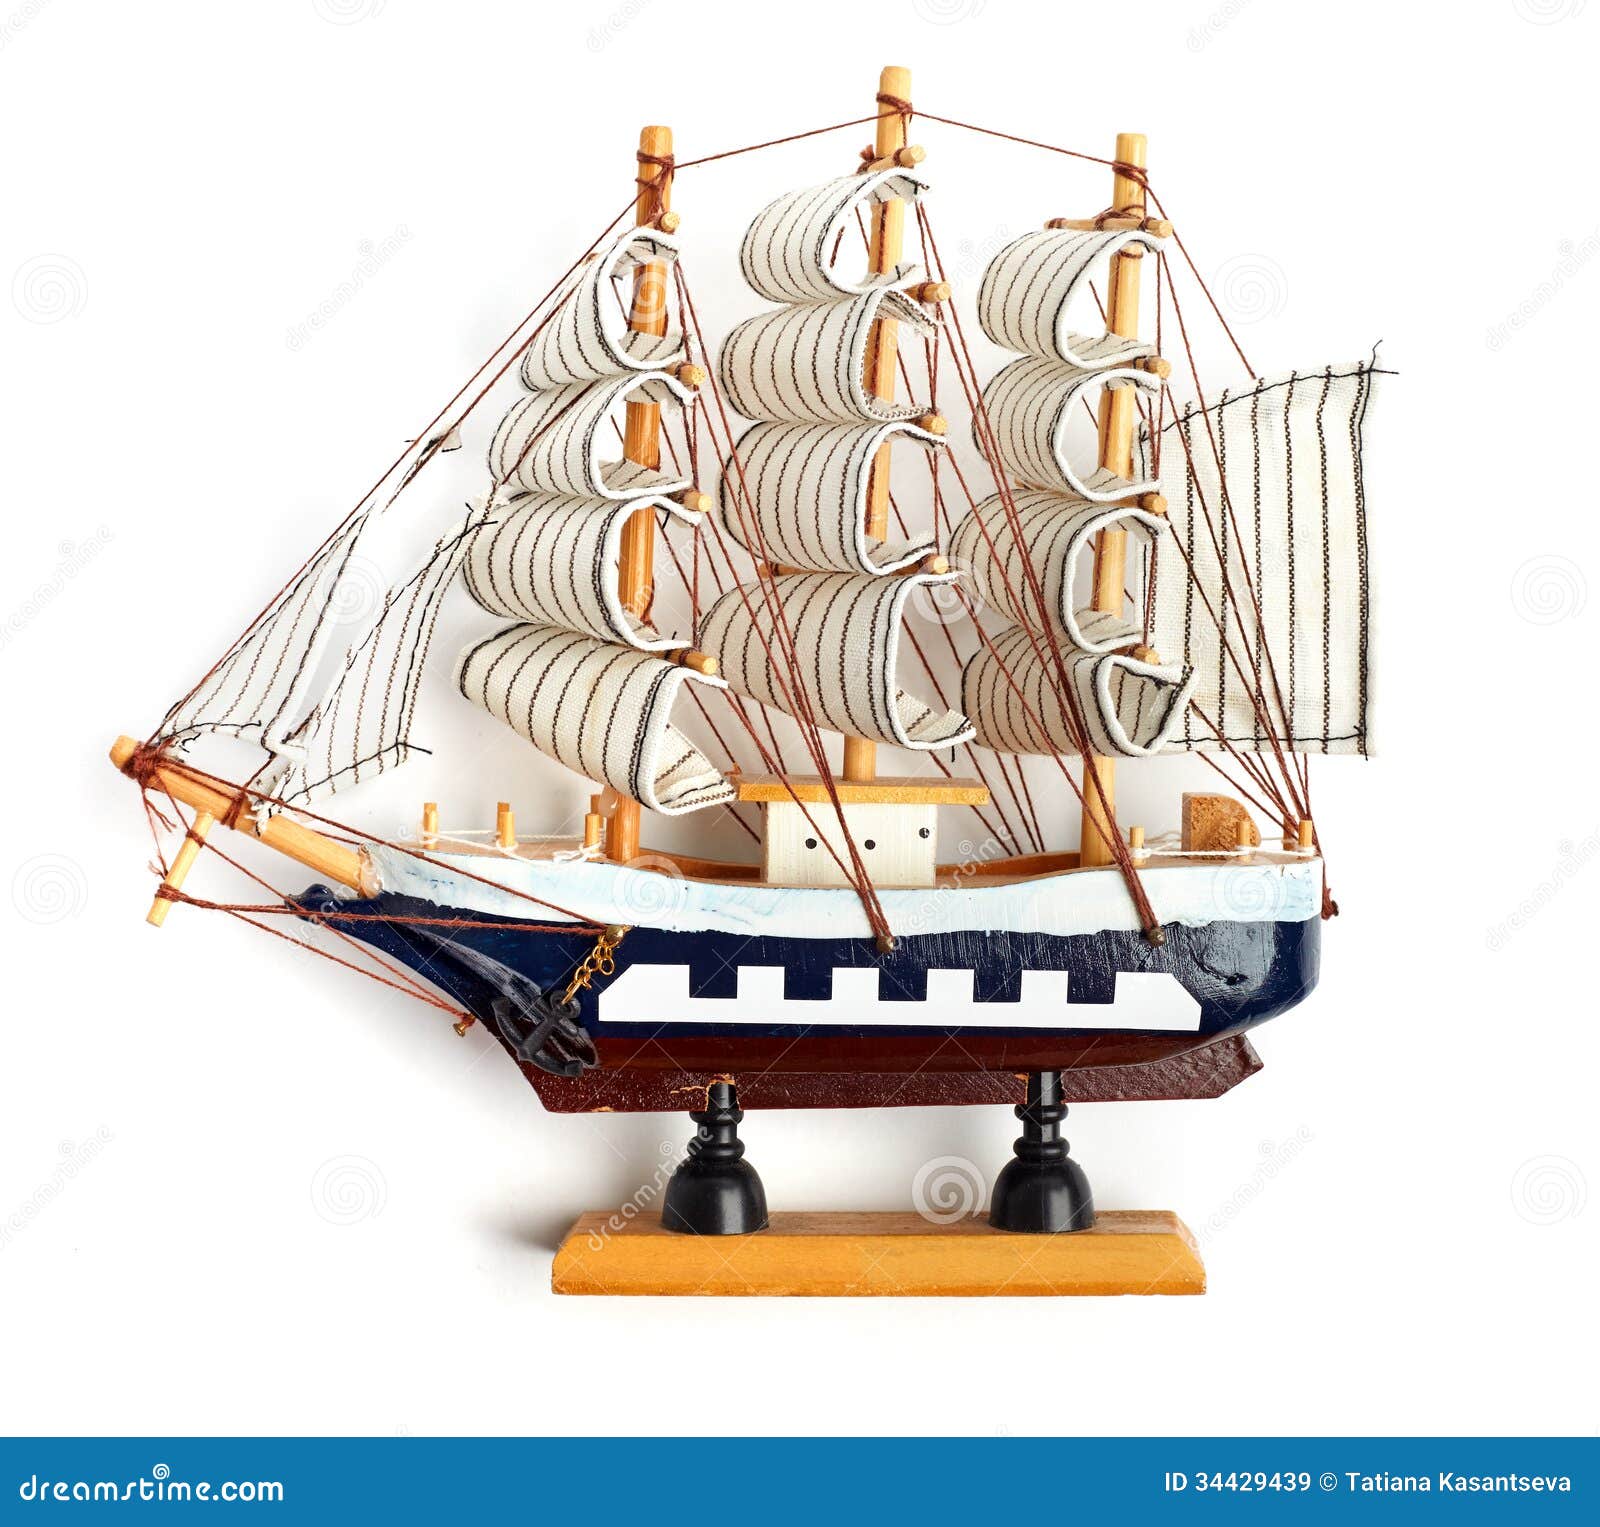 Small Wooden Ship. Royalty Free Stock Images - Image: 34429439